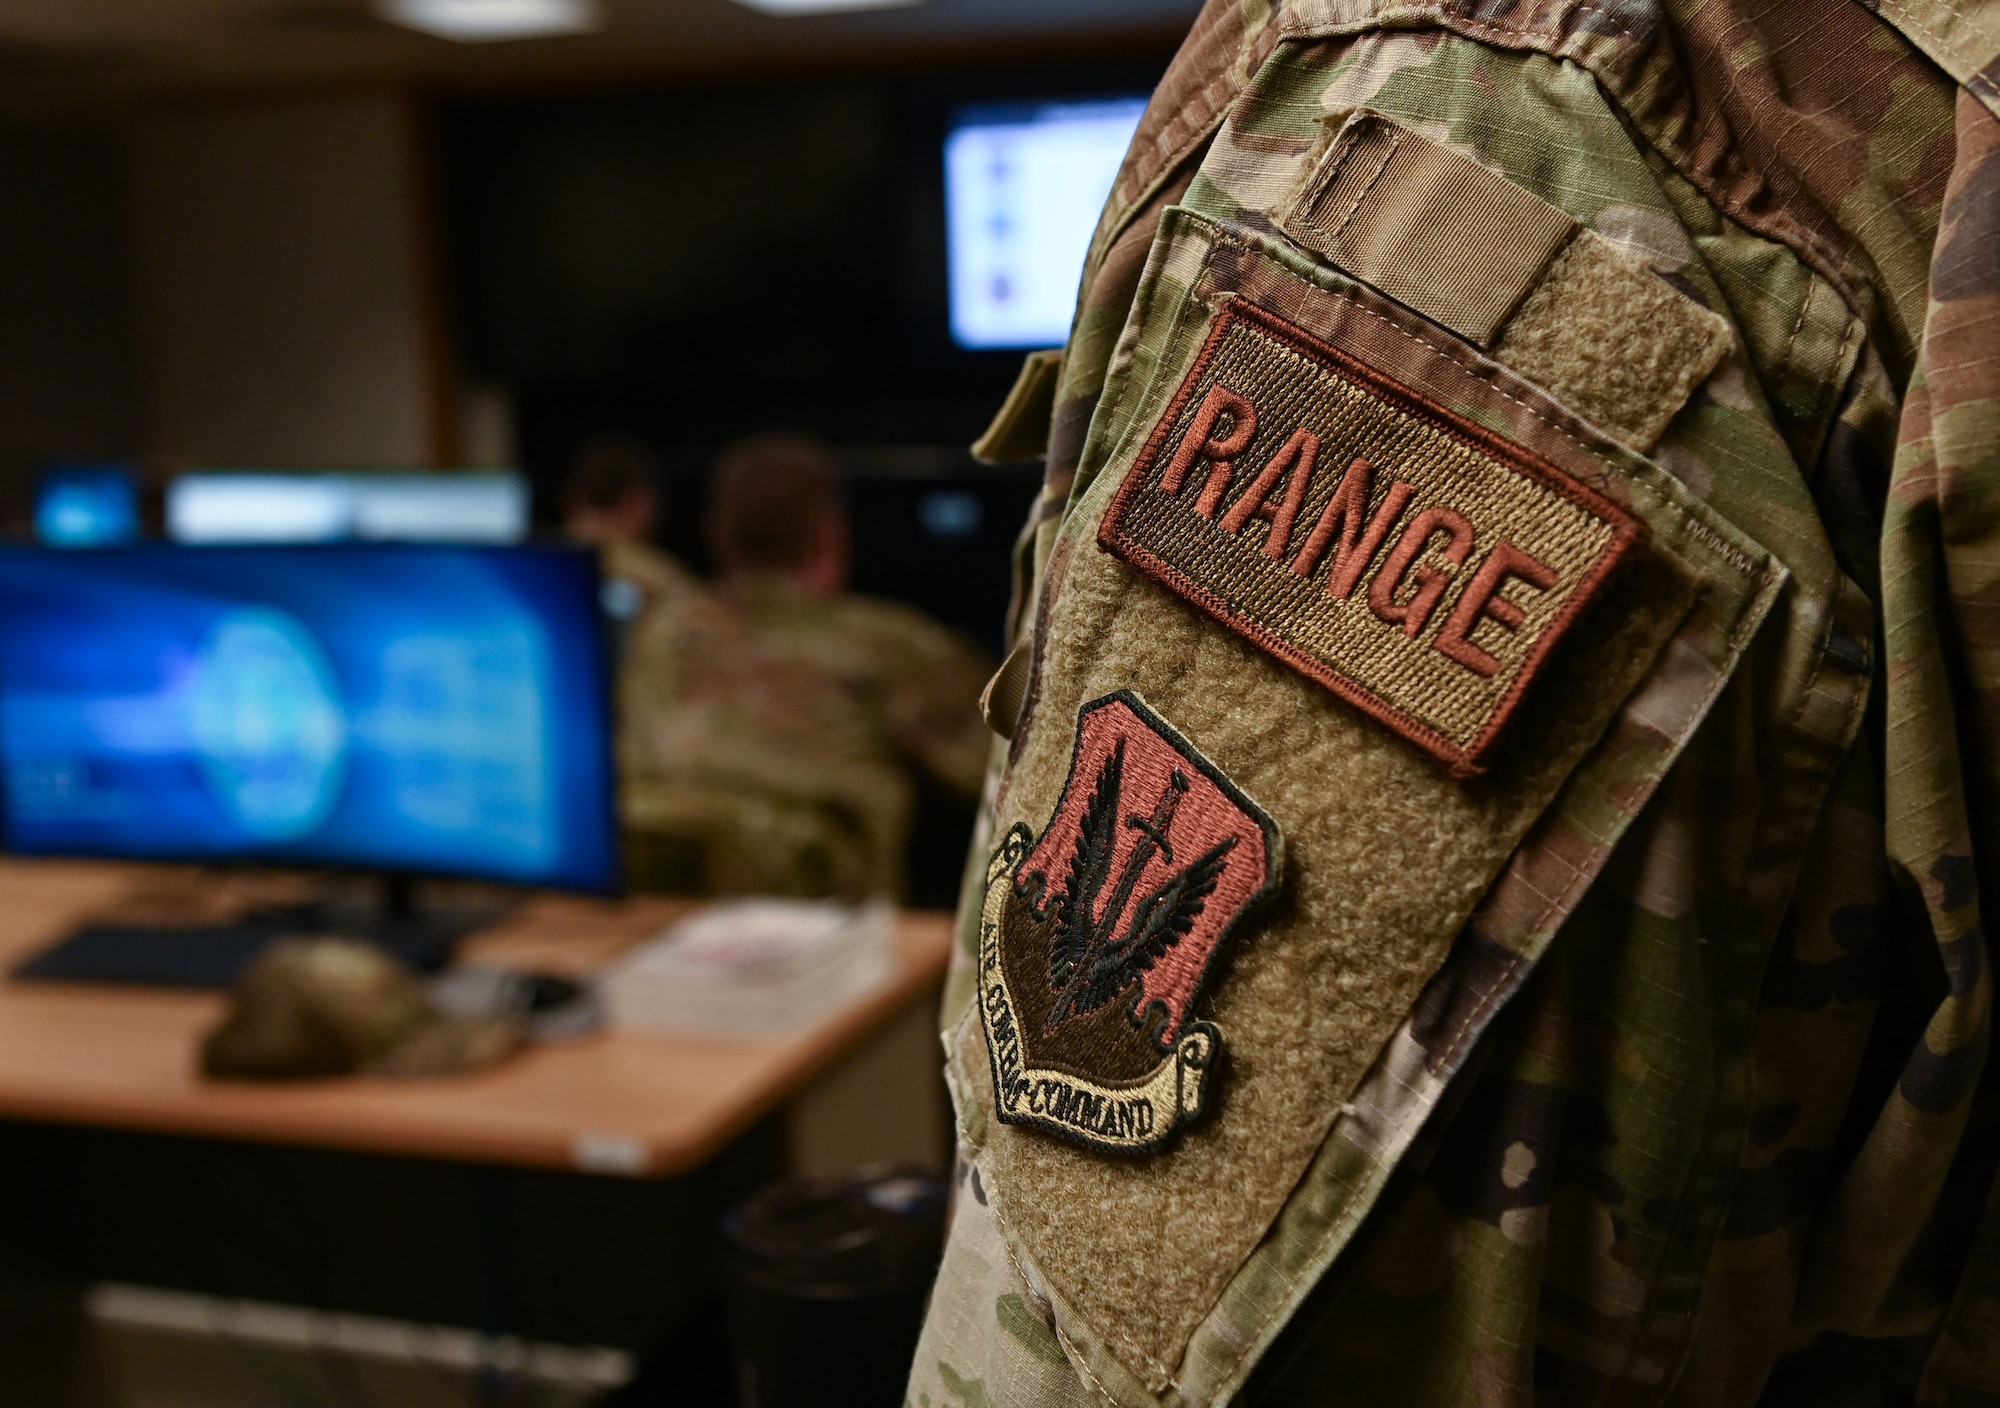 An Airman with a patched titled "Range" stands overlooking a room of computers.